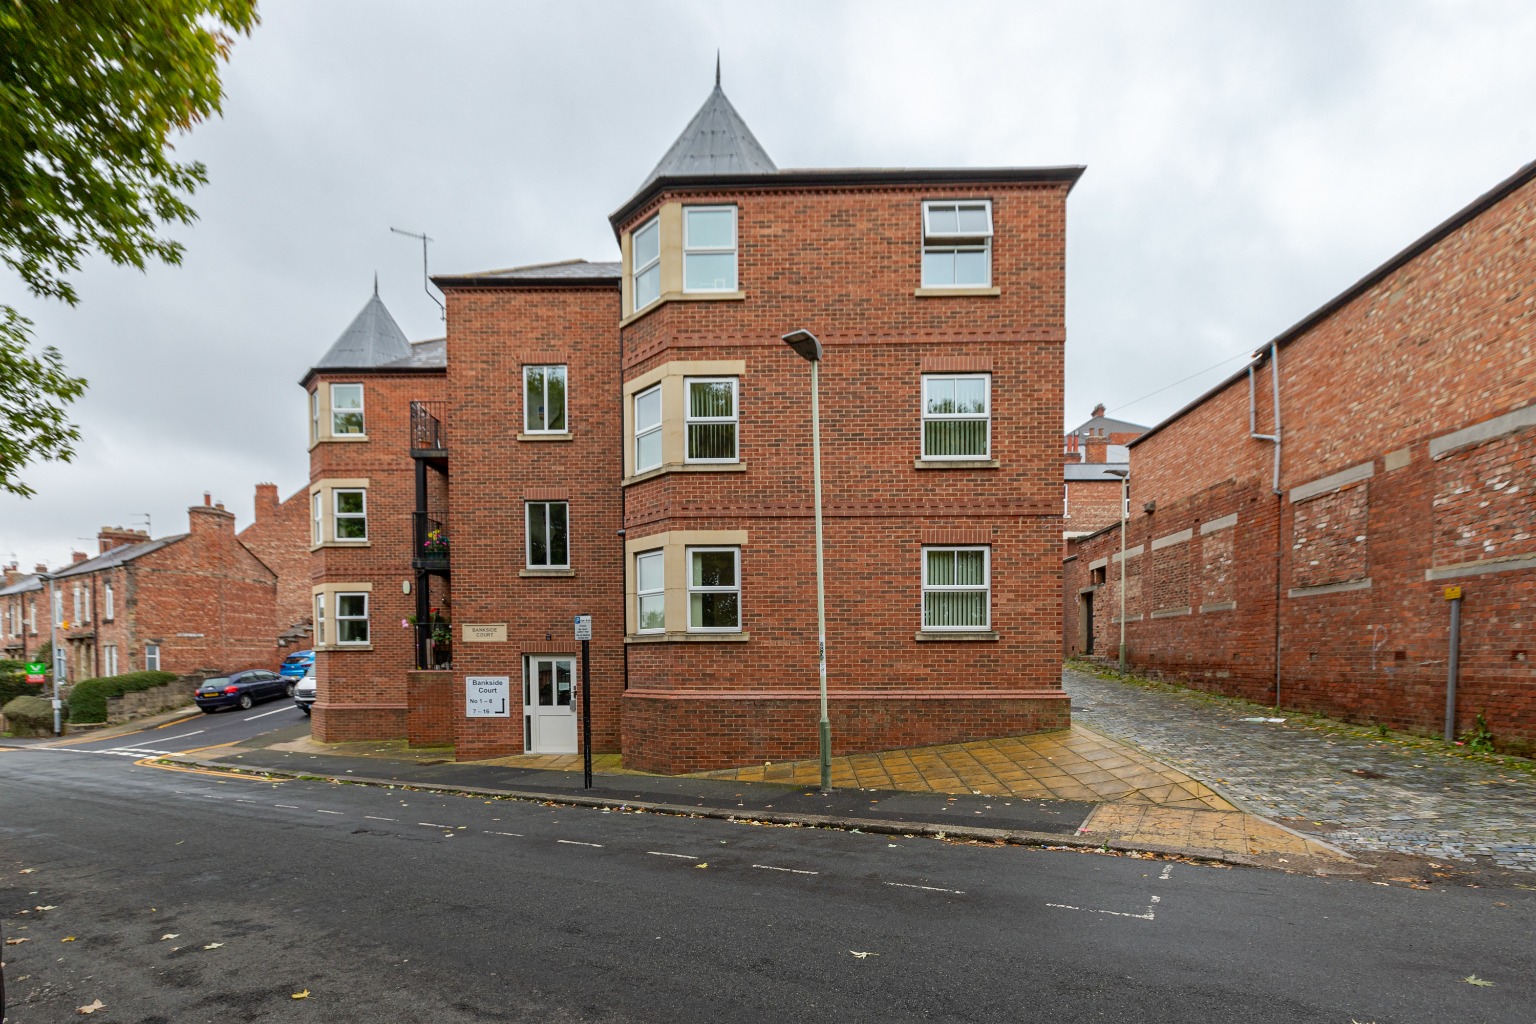 2 bed ground floor flat to rent in Hargreave Terrace, Darlington - Property Image 1